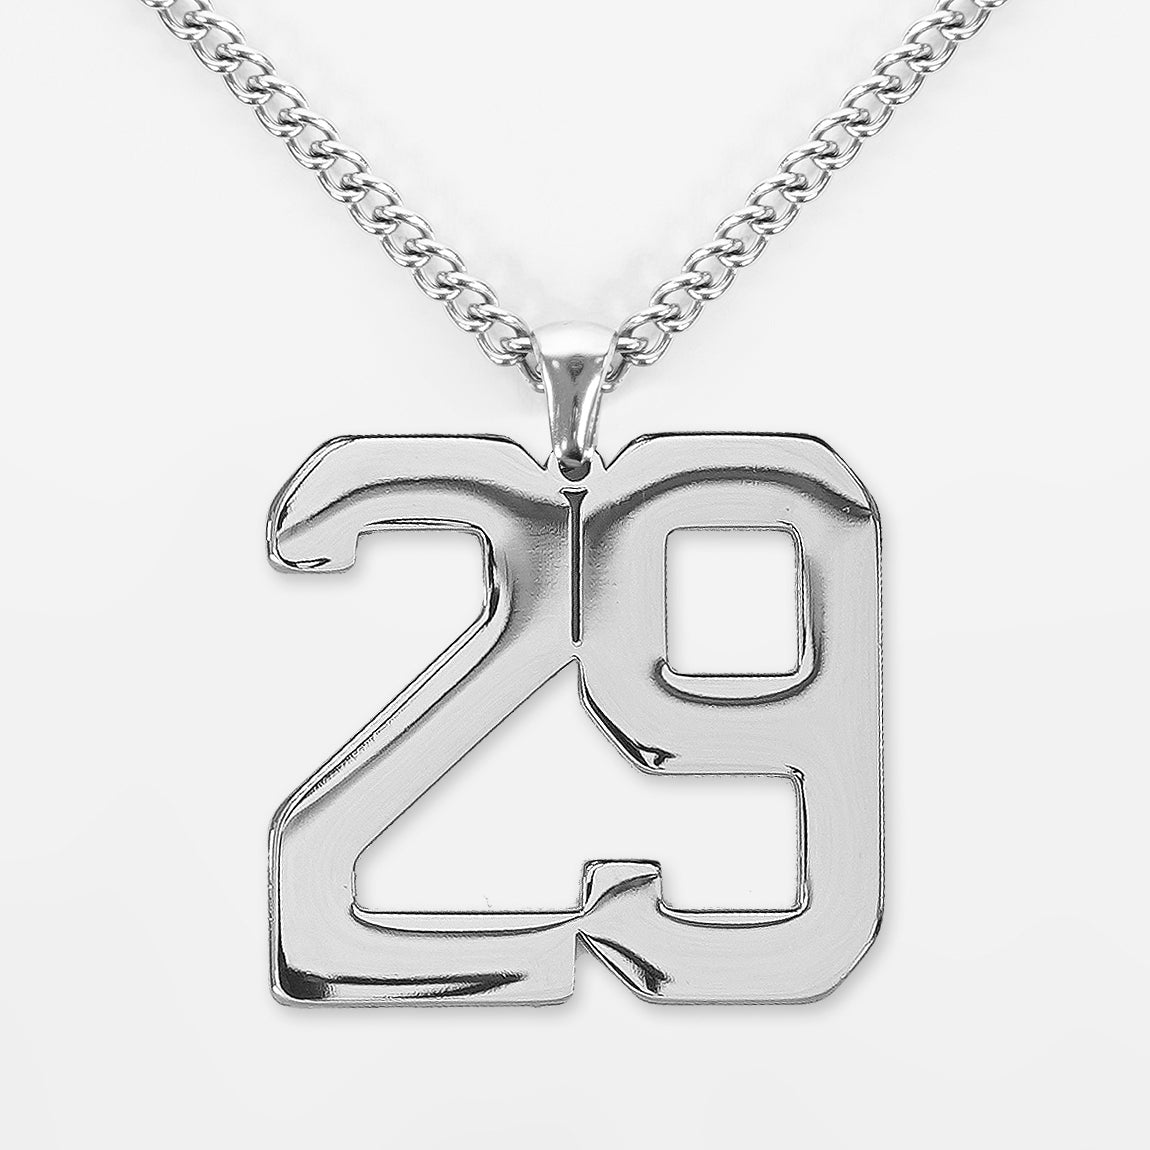 29 Number Pendant with Chain Necklace - Stainless Steel